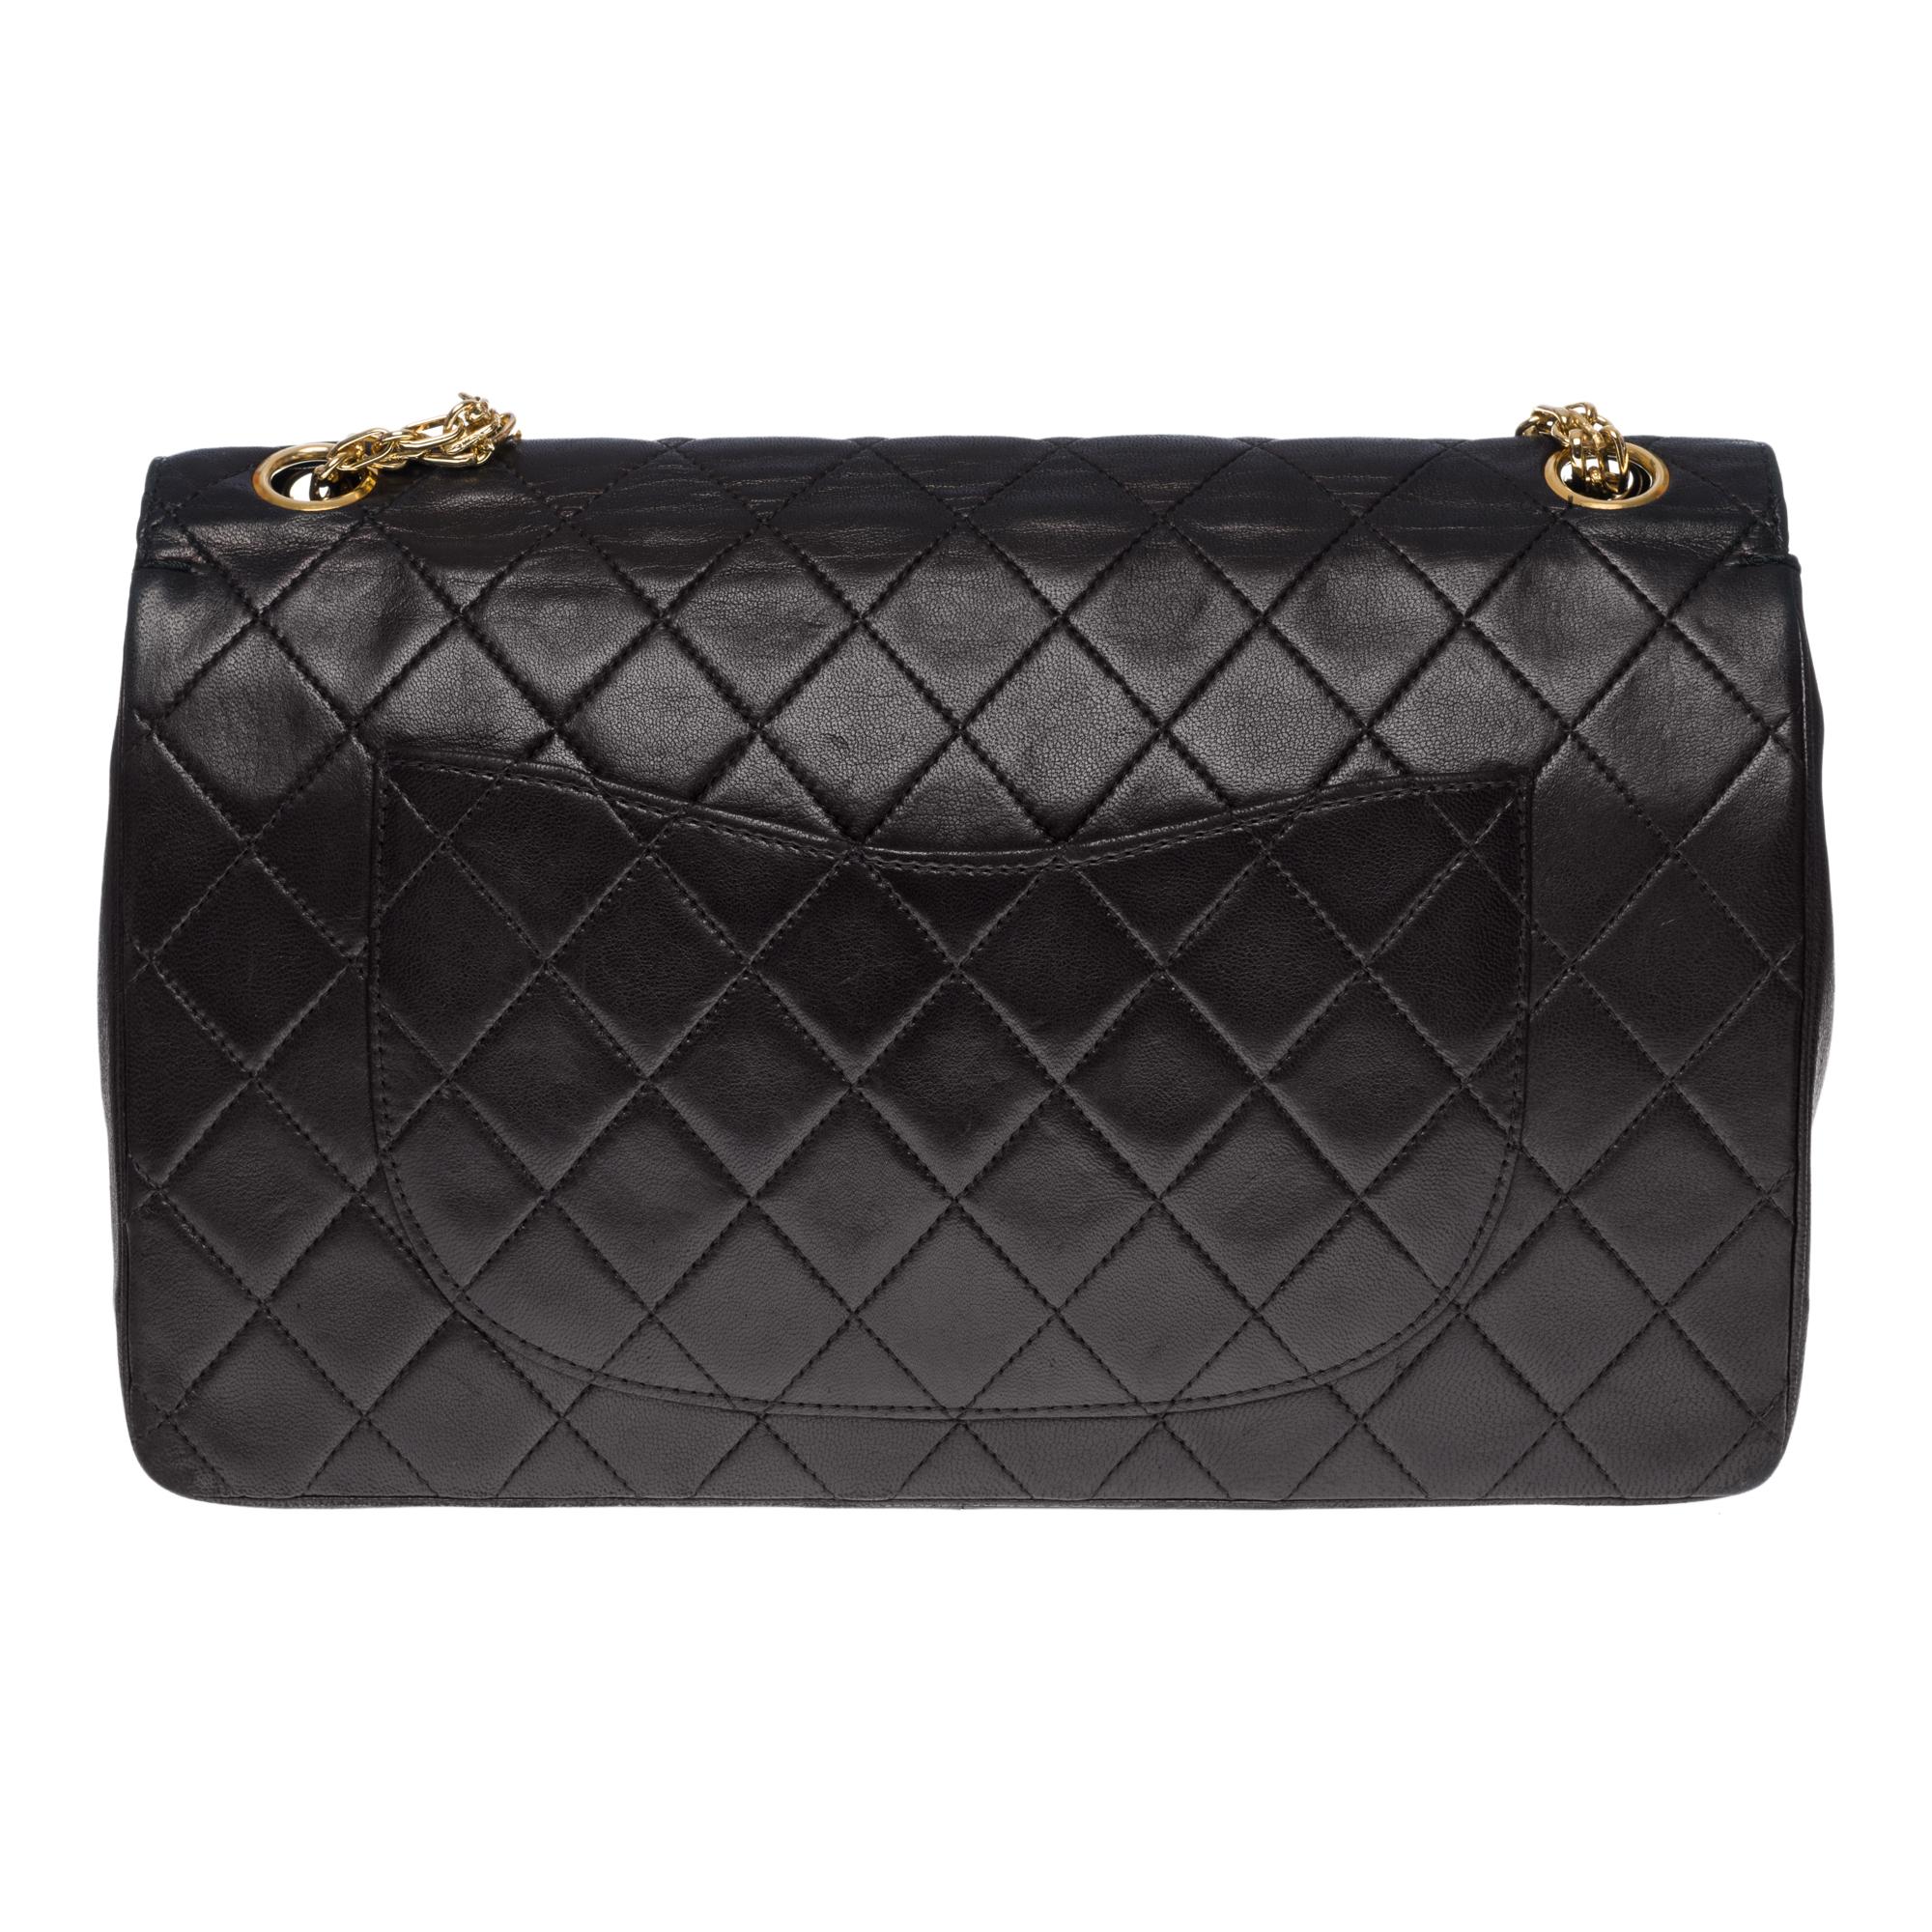 Splendid Chanel Timeless/Classic handbag with double flap in black quilted lamb leather, gold-plated metal hardware, a Mademoiselle gold-plated metal chain handle for a hand or shoulder support

A patch pocket on the back of the bag
Inner lining in